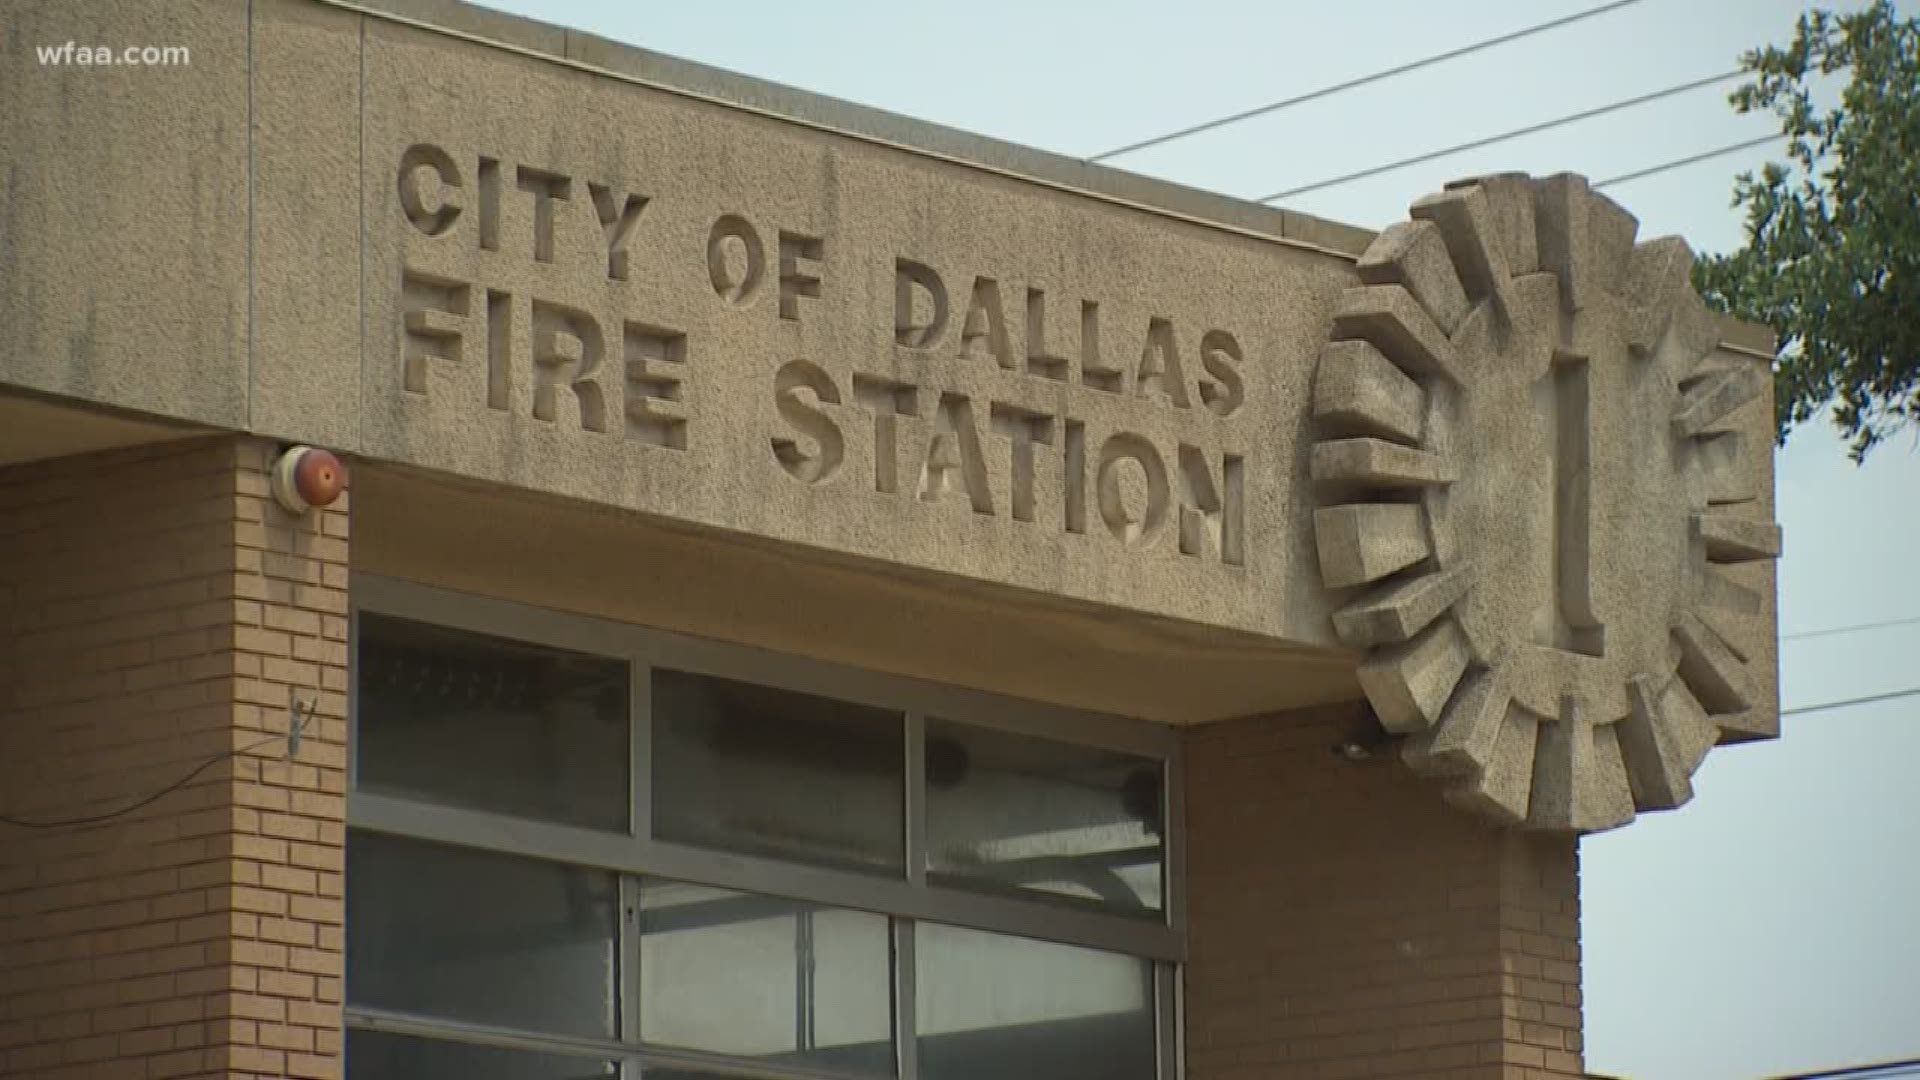 Repairs needed at Dallas Fire Stations